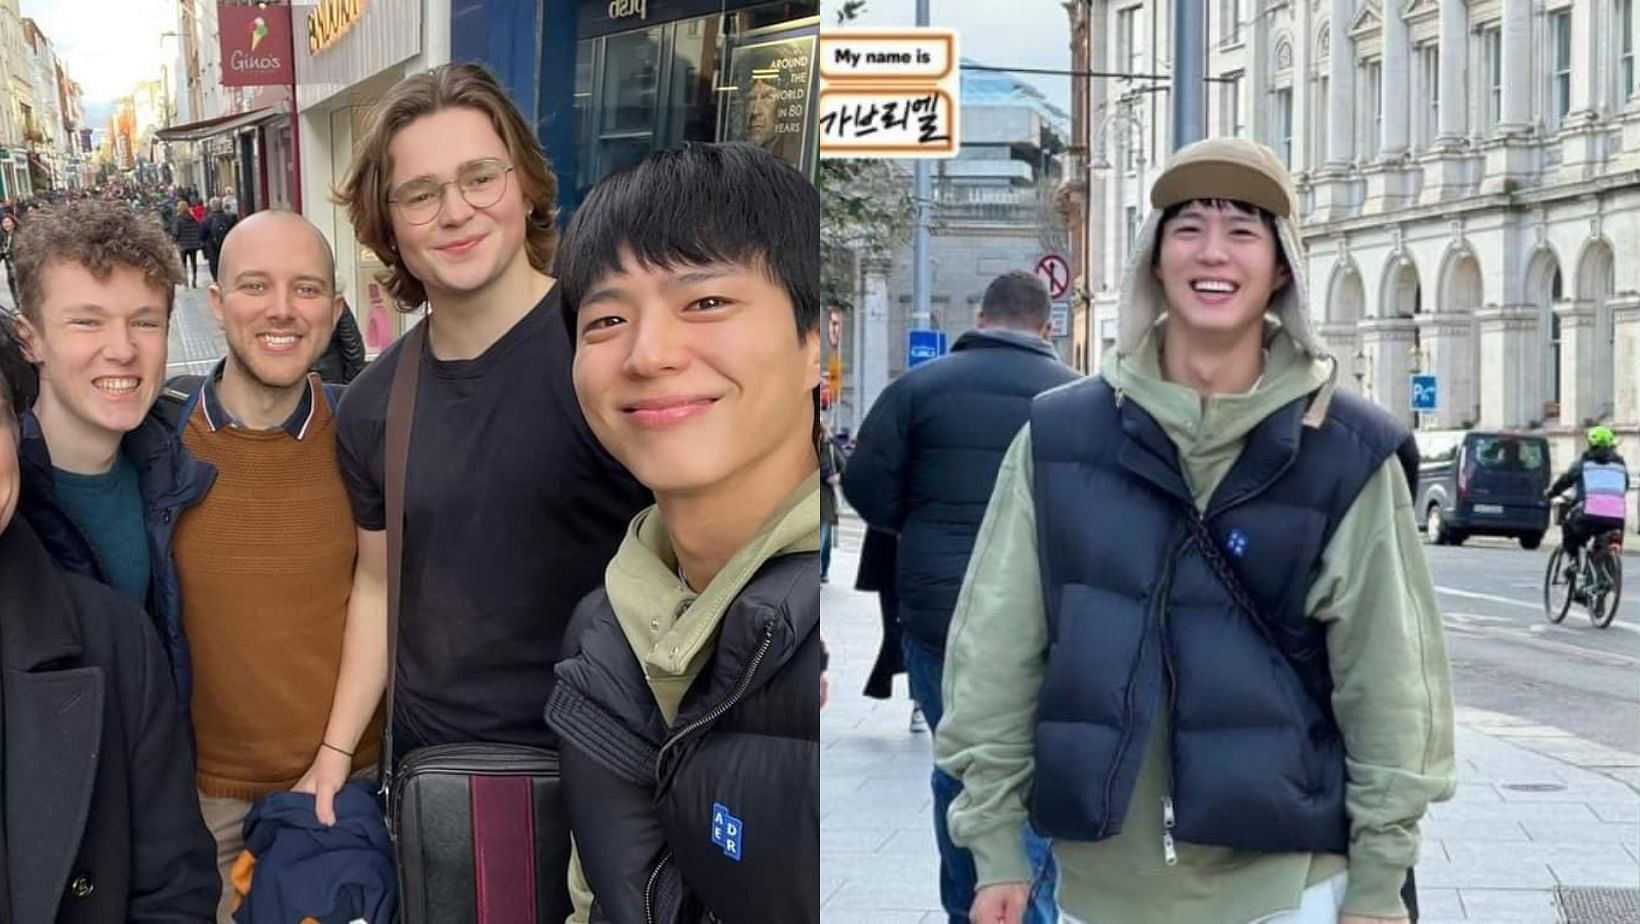 Rory (Park Bo-gum) with his choir group members and friends. (Images via X/@Ramparts_dublin)